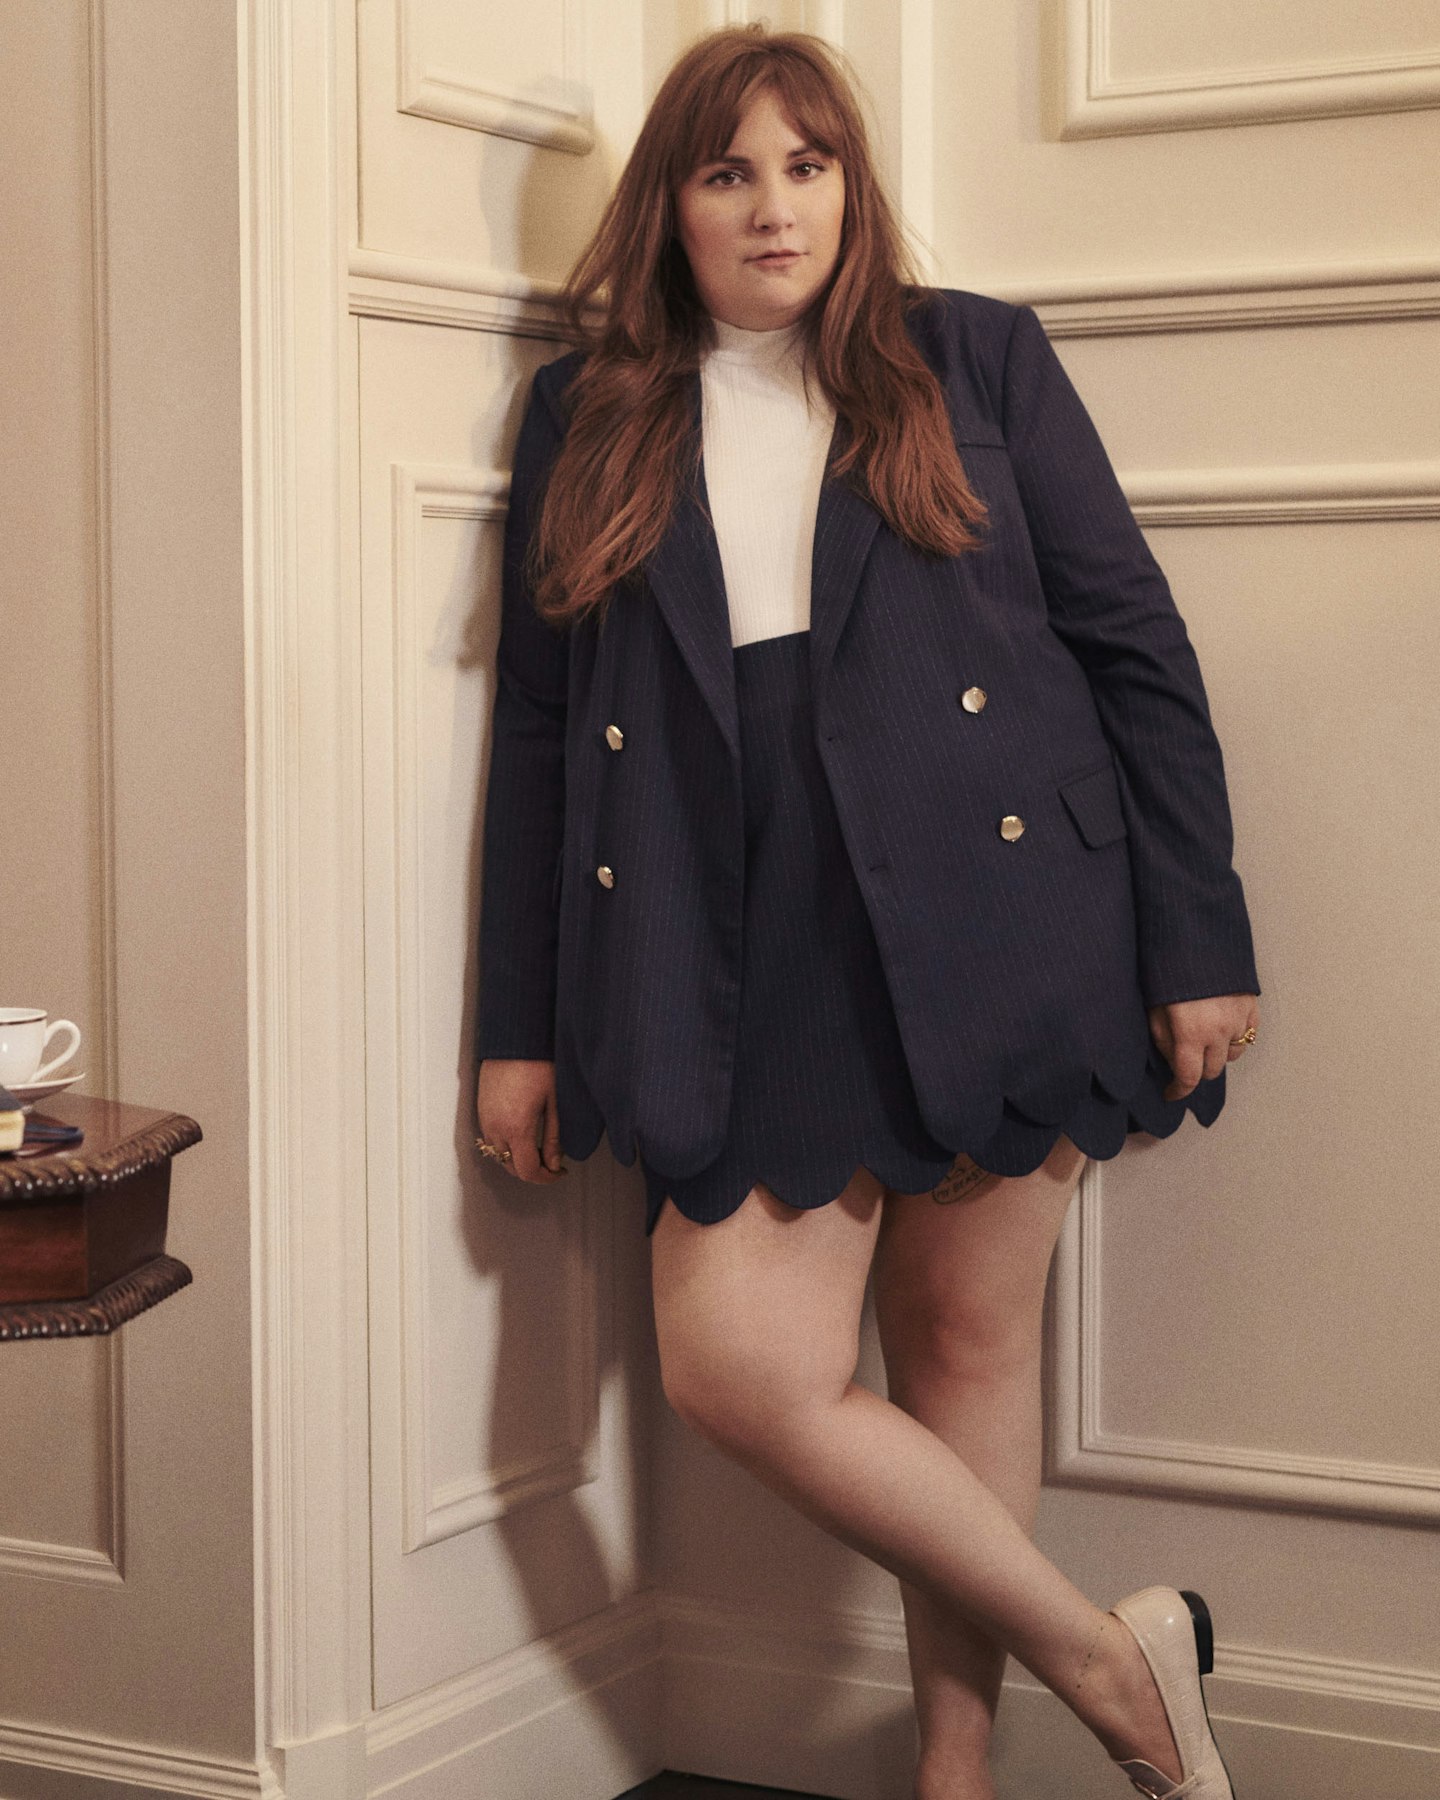 Lena Dunham in her collection for 11 Honoré